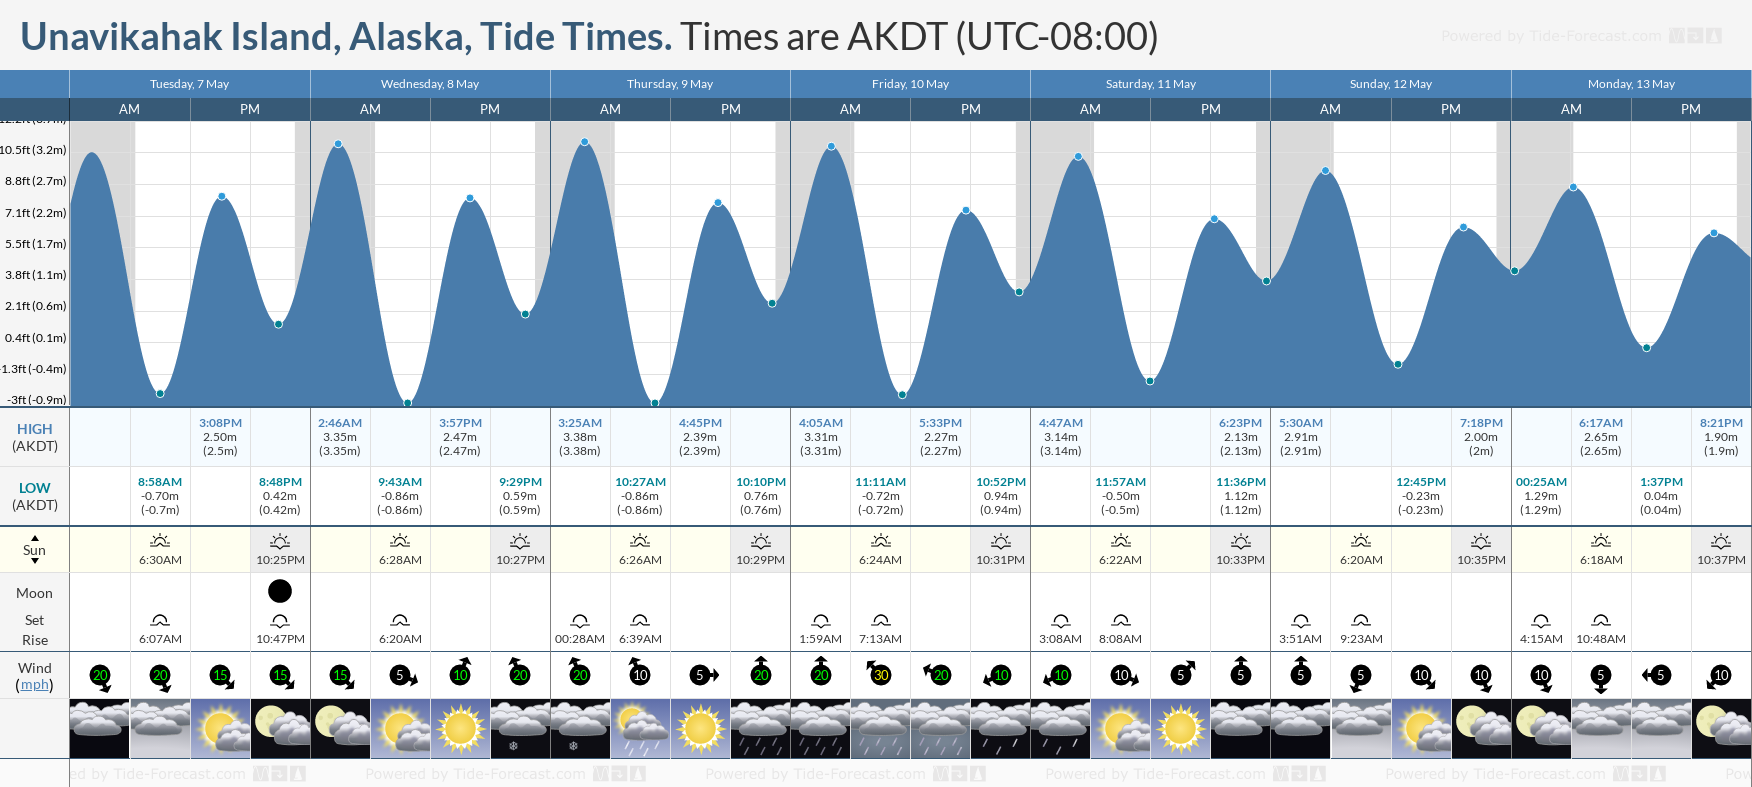 Unavikahak Island, Alaska Tide Chart including high and low tide tide times for the next 7 days